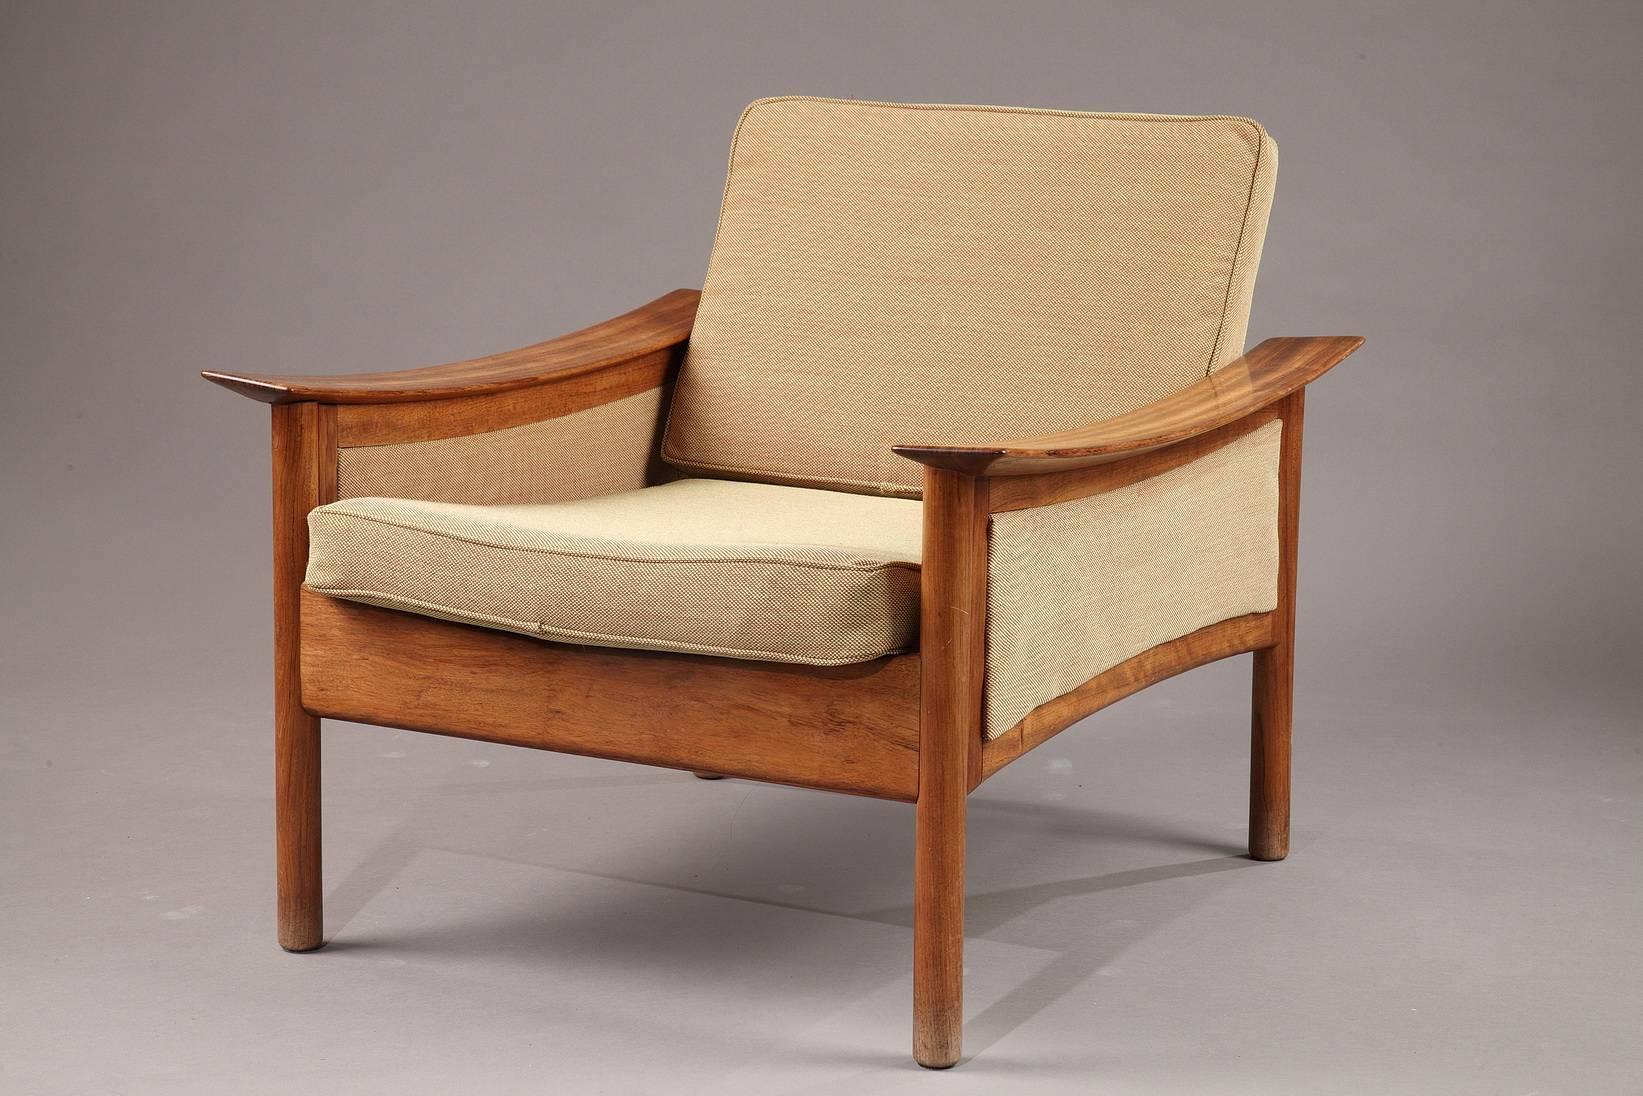 Pair of Scandinavian armchairs in teak with beige upholstery by the Norwegian designer Oskar Langlo, edited by P. I. Langlos Fabrikker A/S, in Stranda, Norway. Made in the 1950s, these organically shaped armchairs are a typical item of the so-called